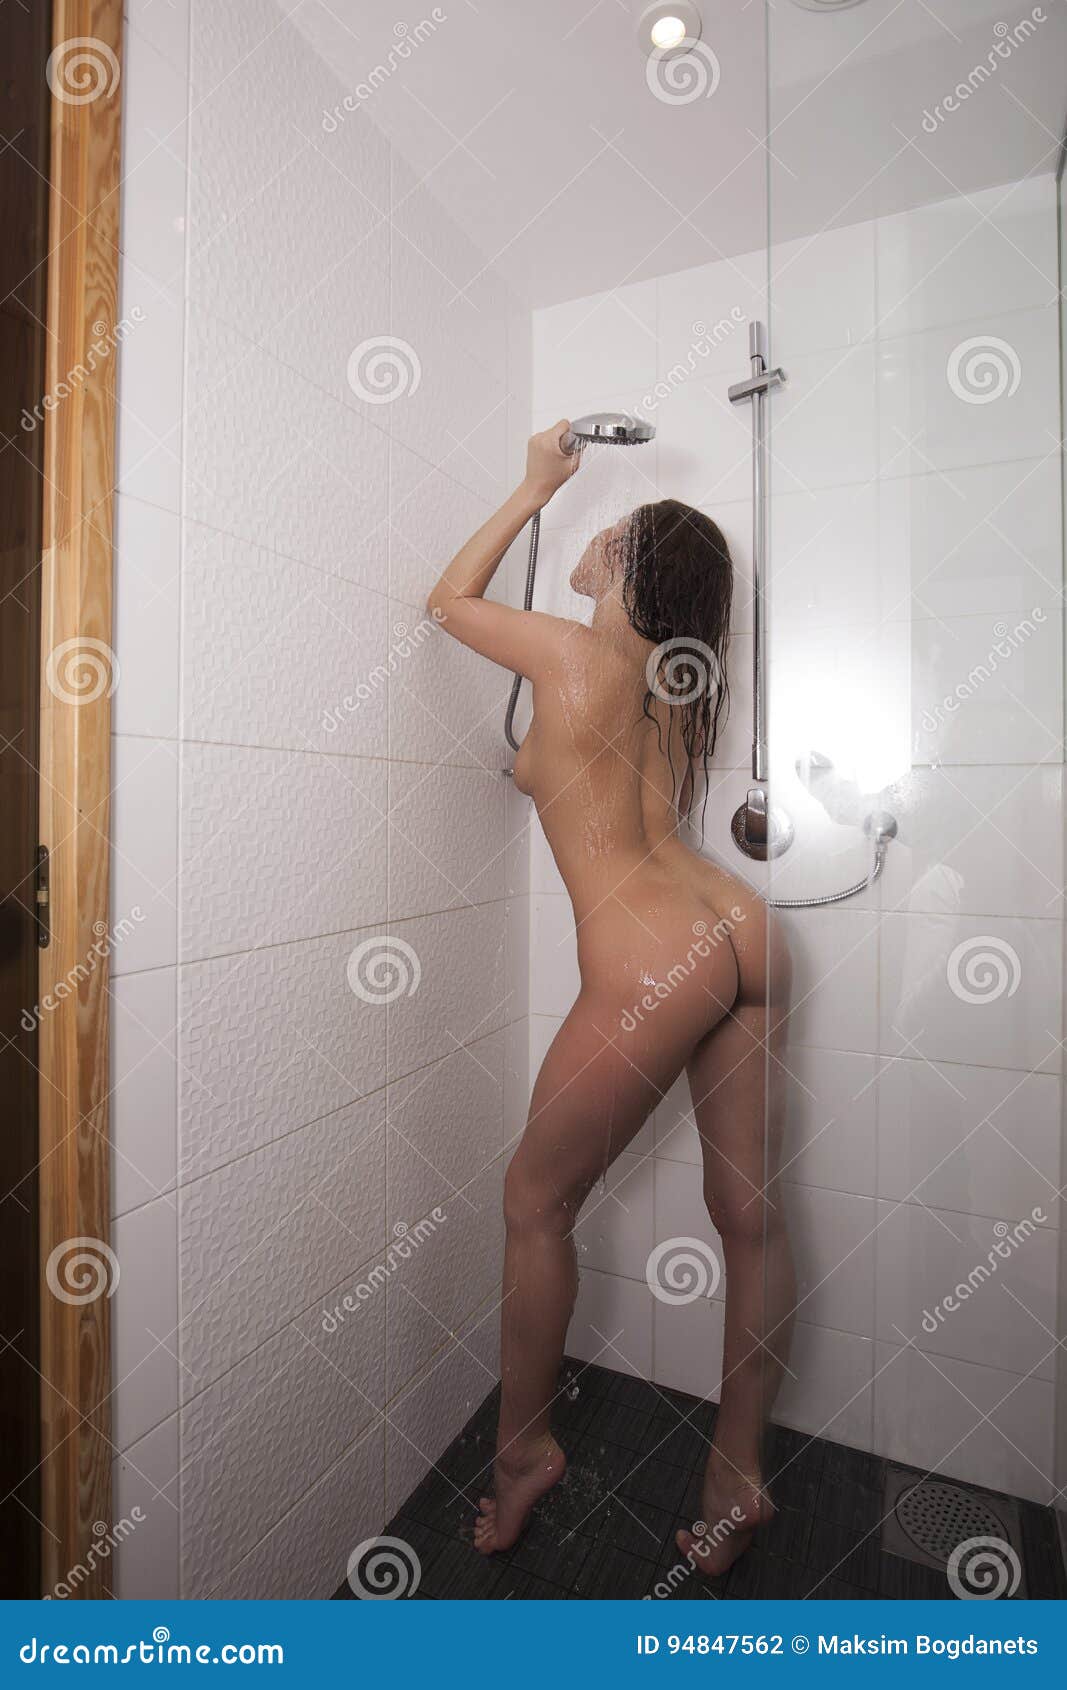 Dark haired girl goes out of shower and shows nude body